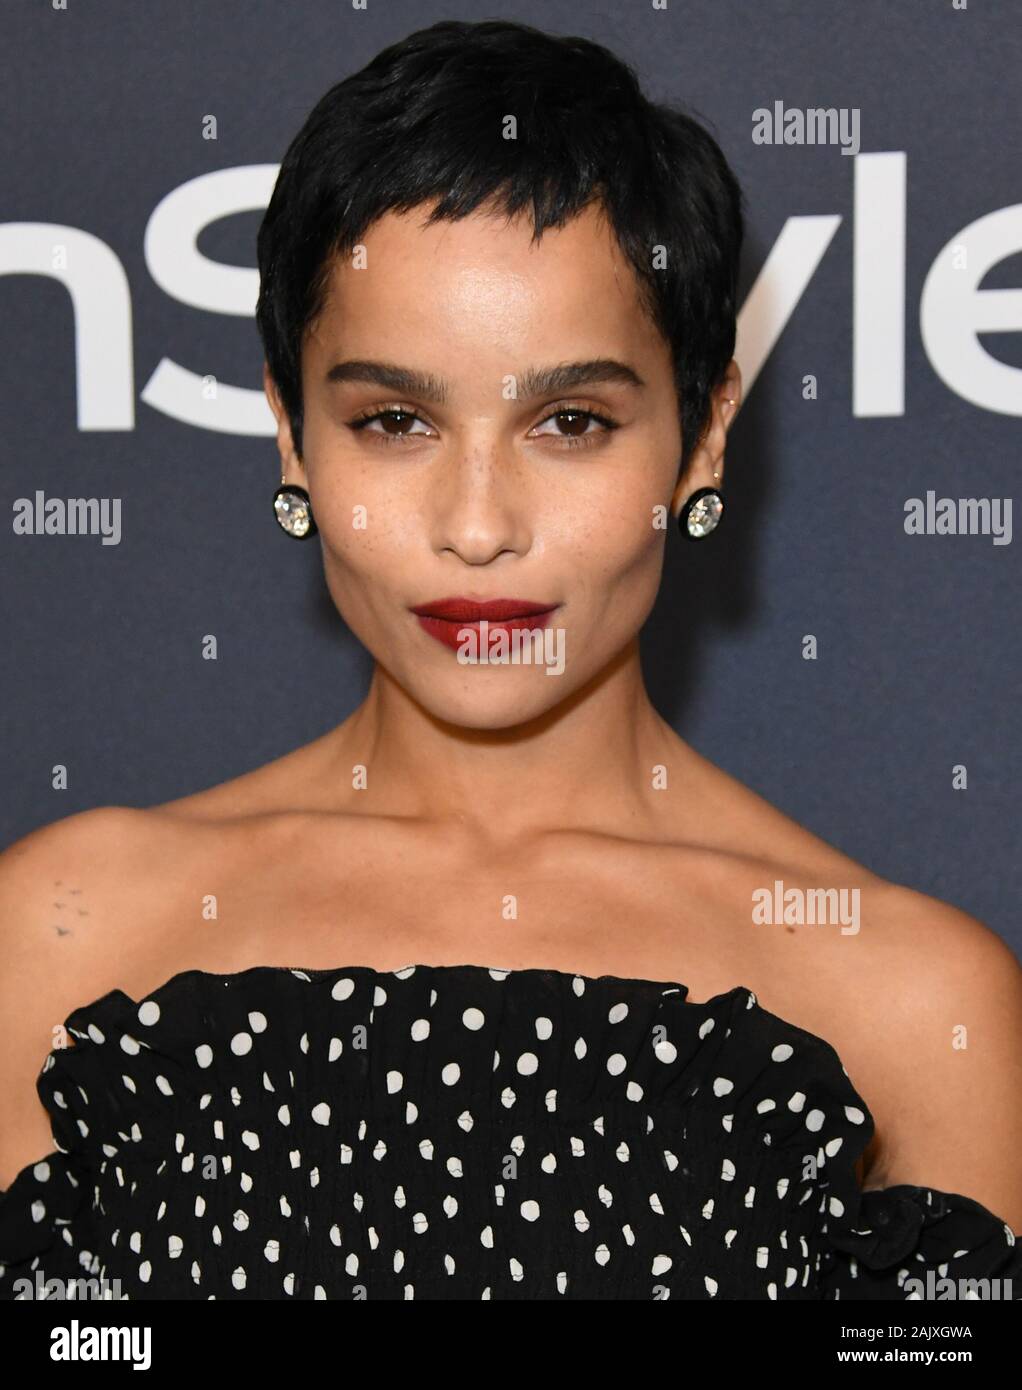 05 January 2020 - Beverly Hills, California - Zoe Kravitz. 21st Annual InStyle and Warner Bros. Golden Globes After Party held at Beverly Hilton Hotel. (Credit Image: © Birdie Thompson/AdMedia via ZUMA Wire) Stock Photo